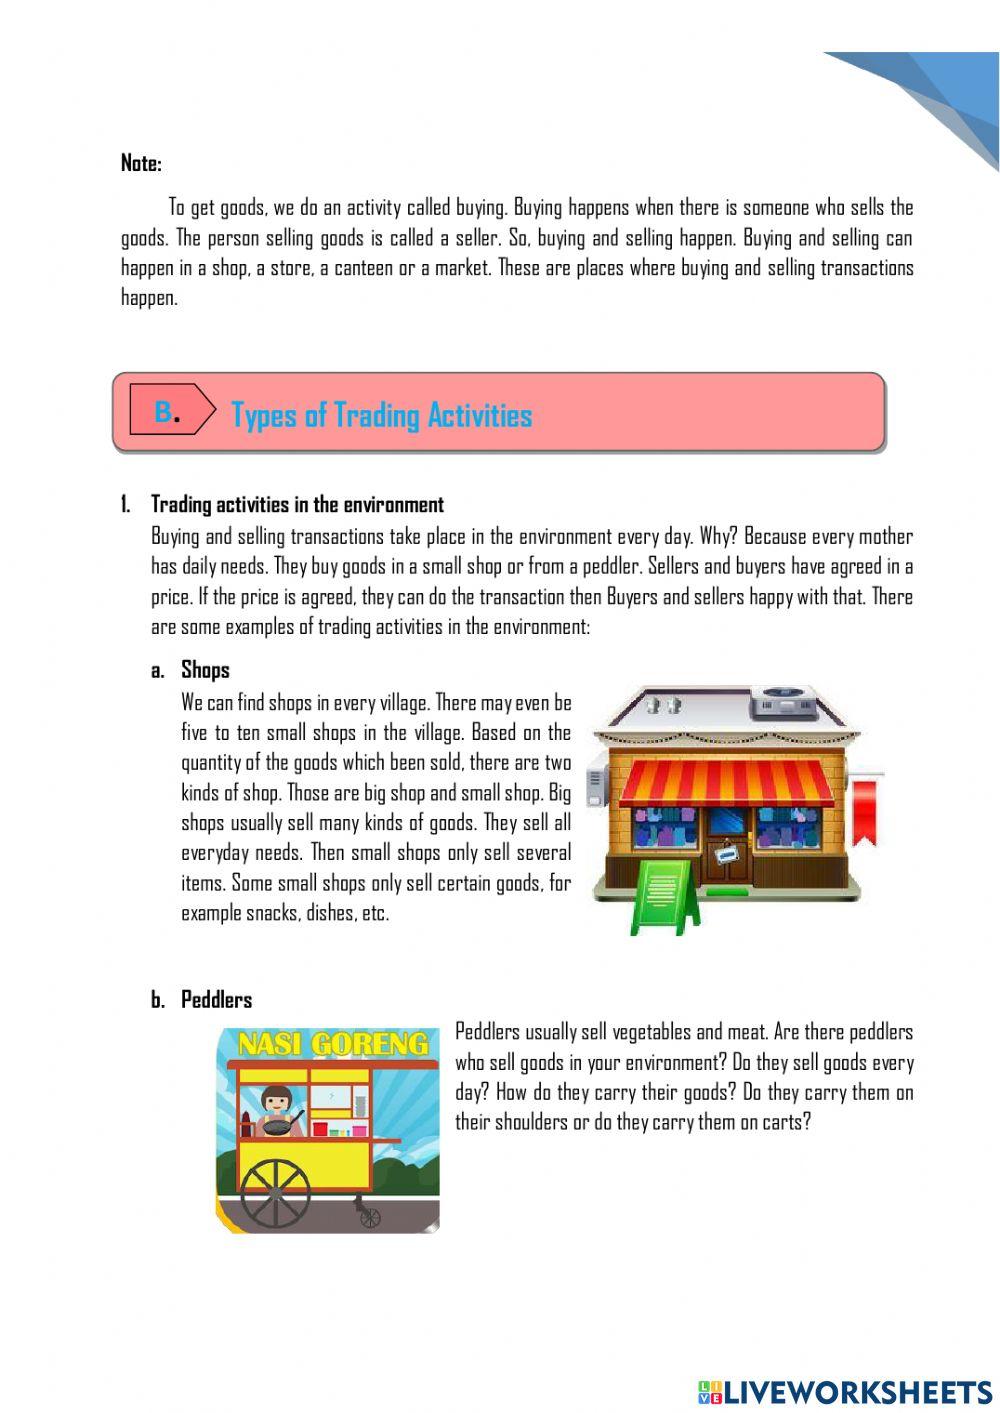 Buying and selling activities